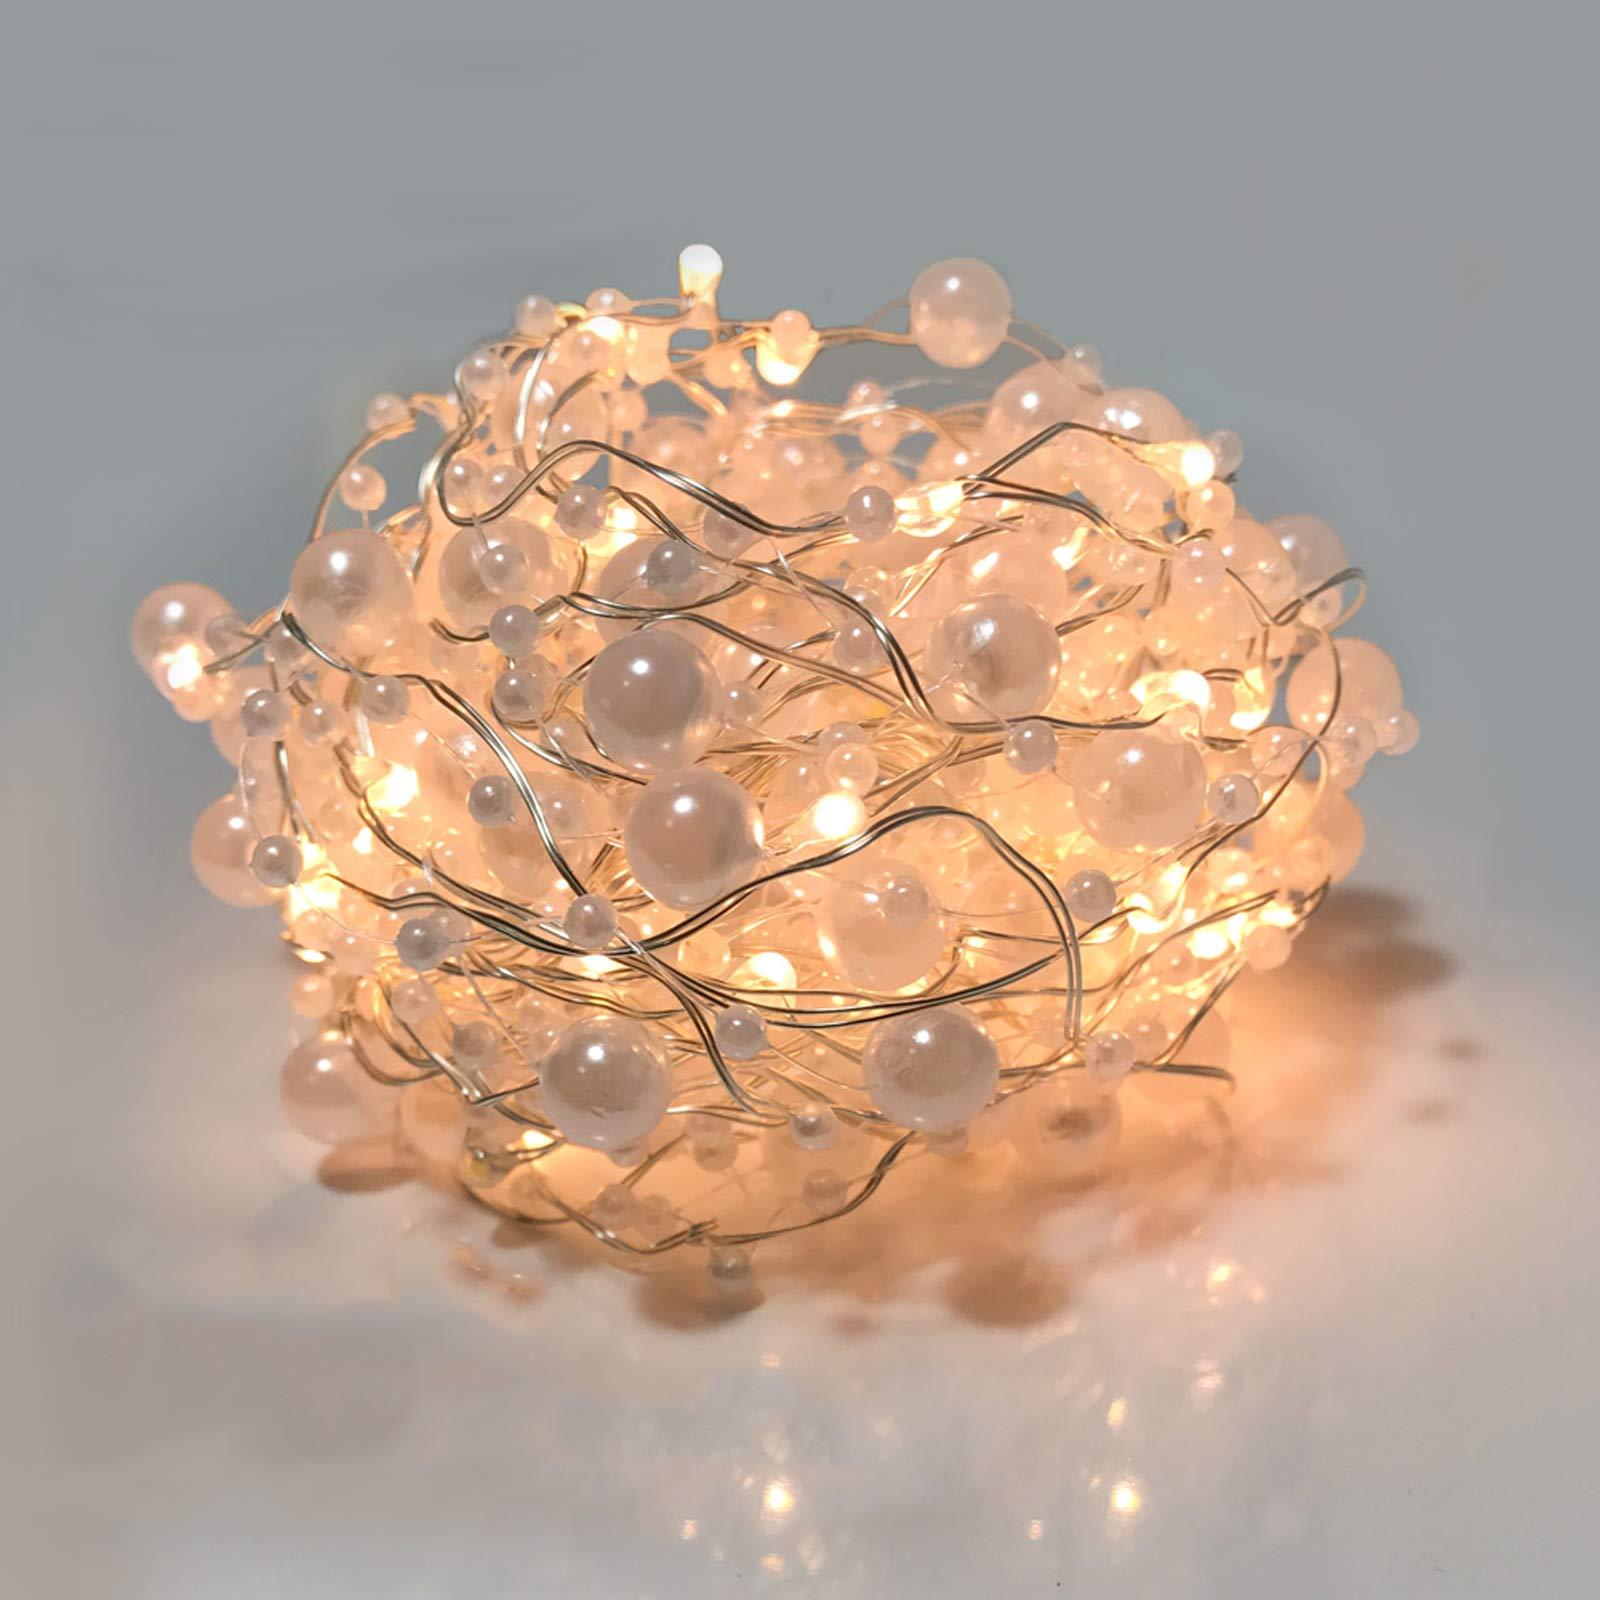 XEMQENER String Lights Battery Operated 60 LED 6M Pearl Fairy Lights with 8 Functions & Timer for Outdoor Indoor Christmas Halloween Wedding Home Decoration Warm White